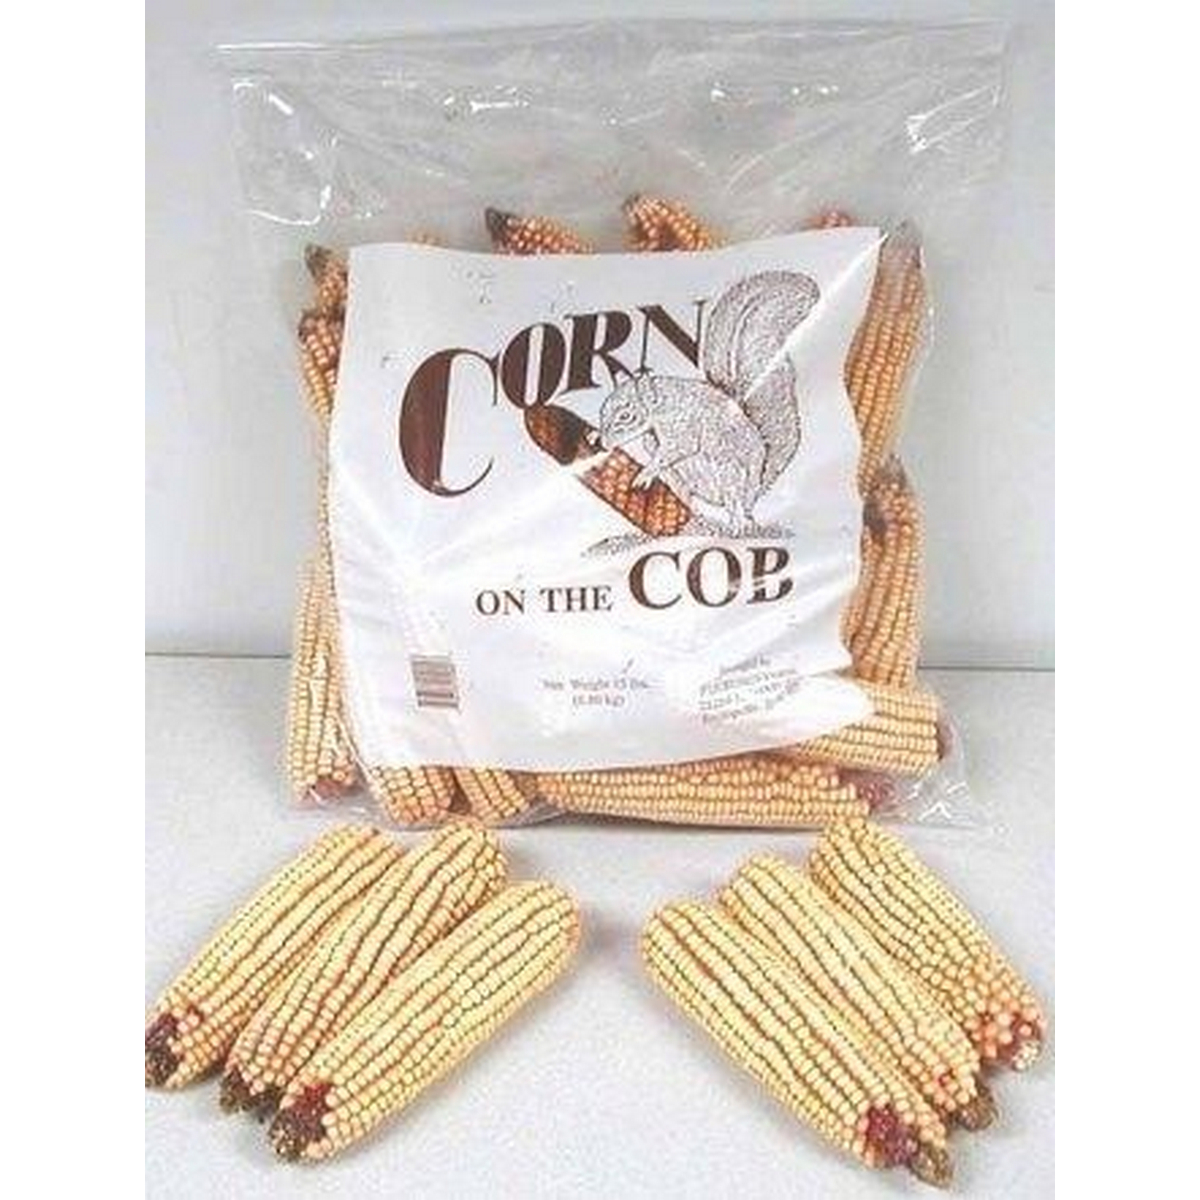 Picture of Zerrusen Farm 932901 15 lbs Corn on The Cob Corn Squirrel Food - Master Pack 80